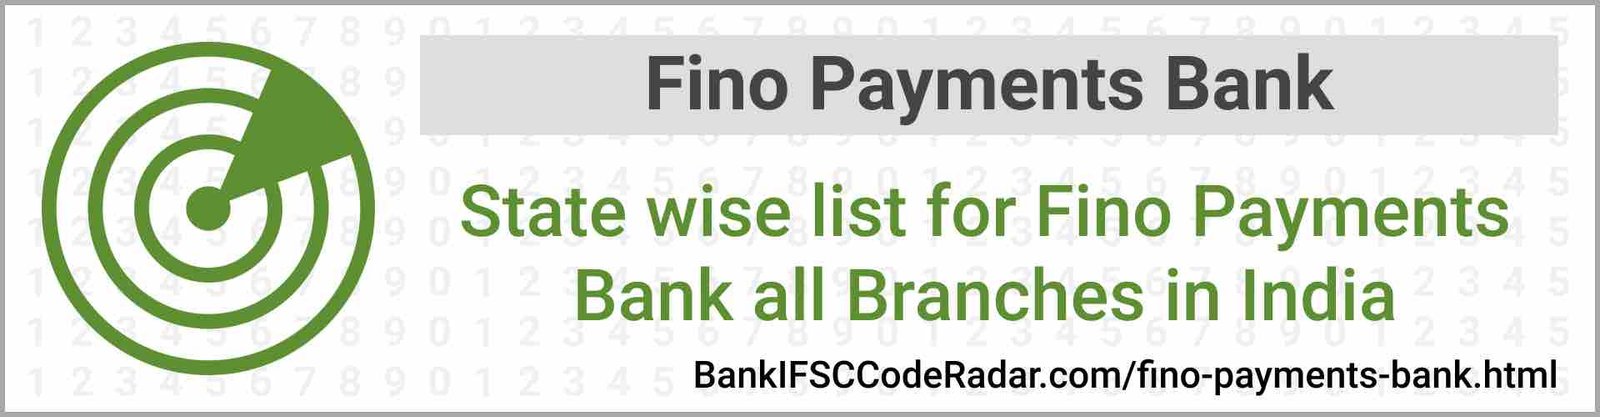 Fino Payments Bank All Branches India